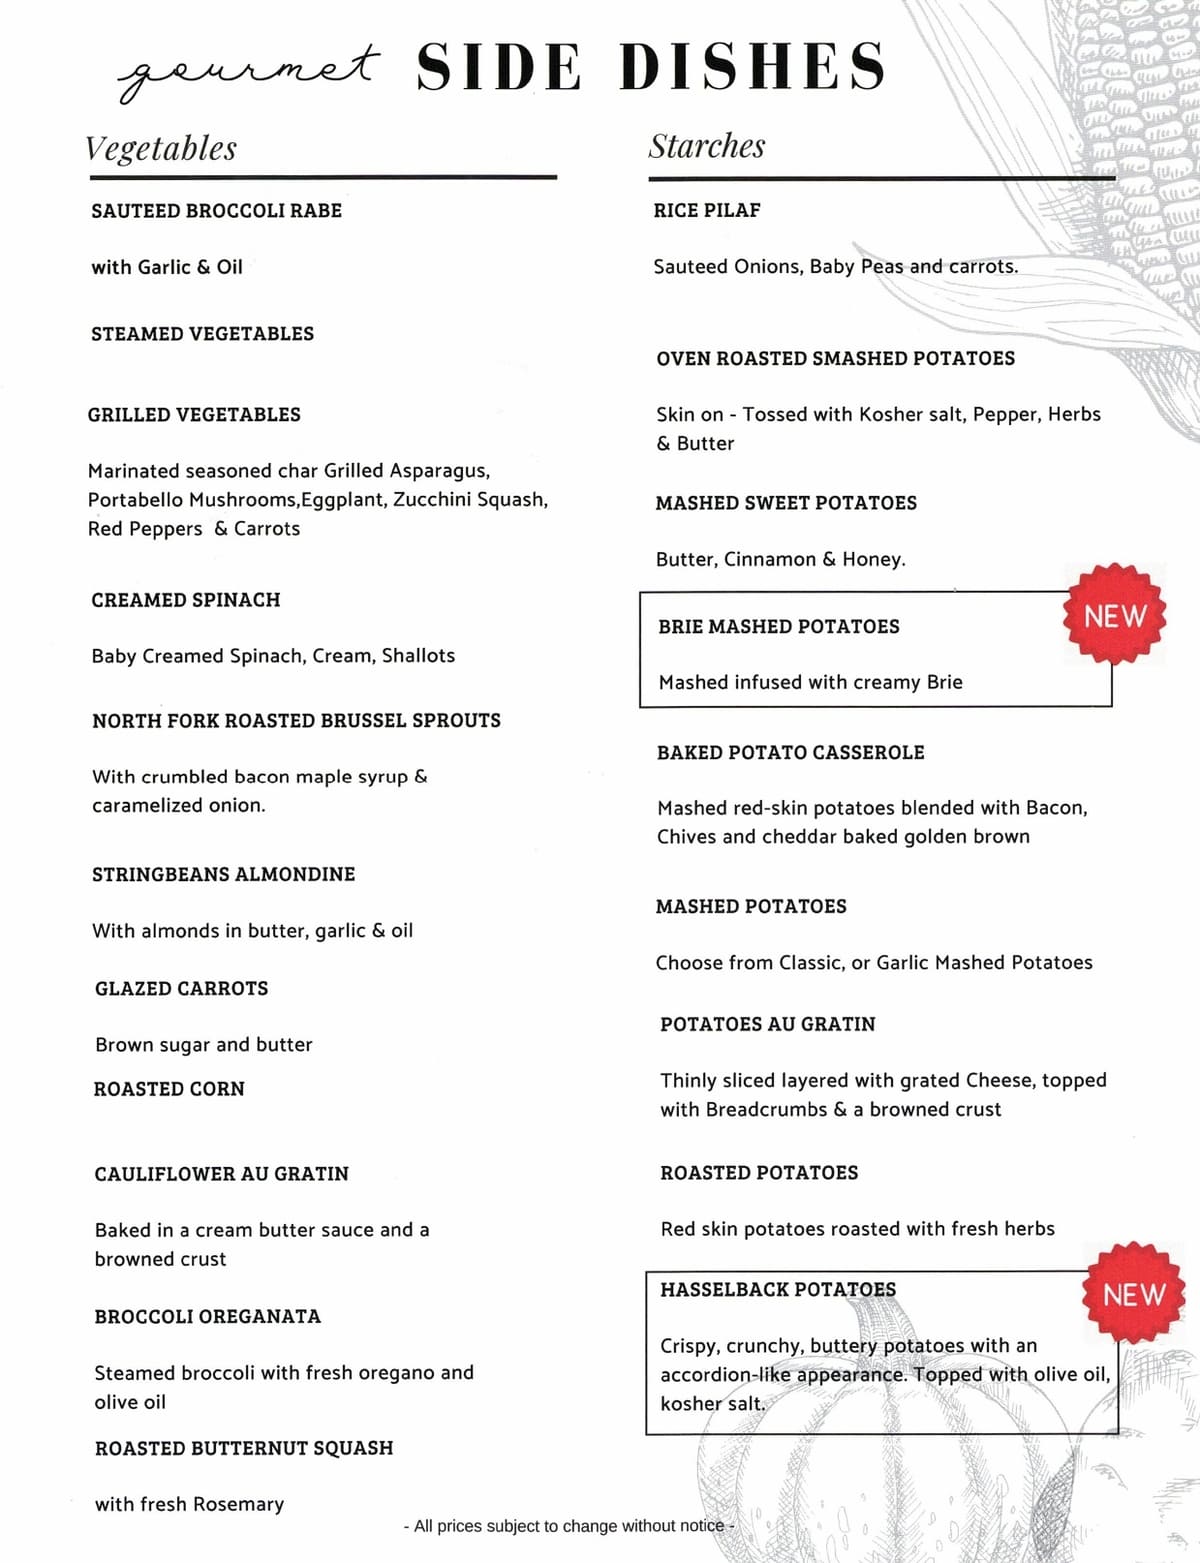 Catering Menu - Gourmet Side Dishes